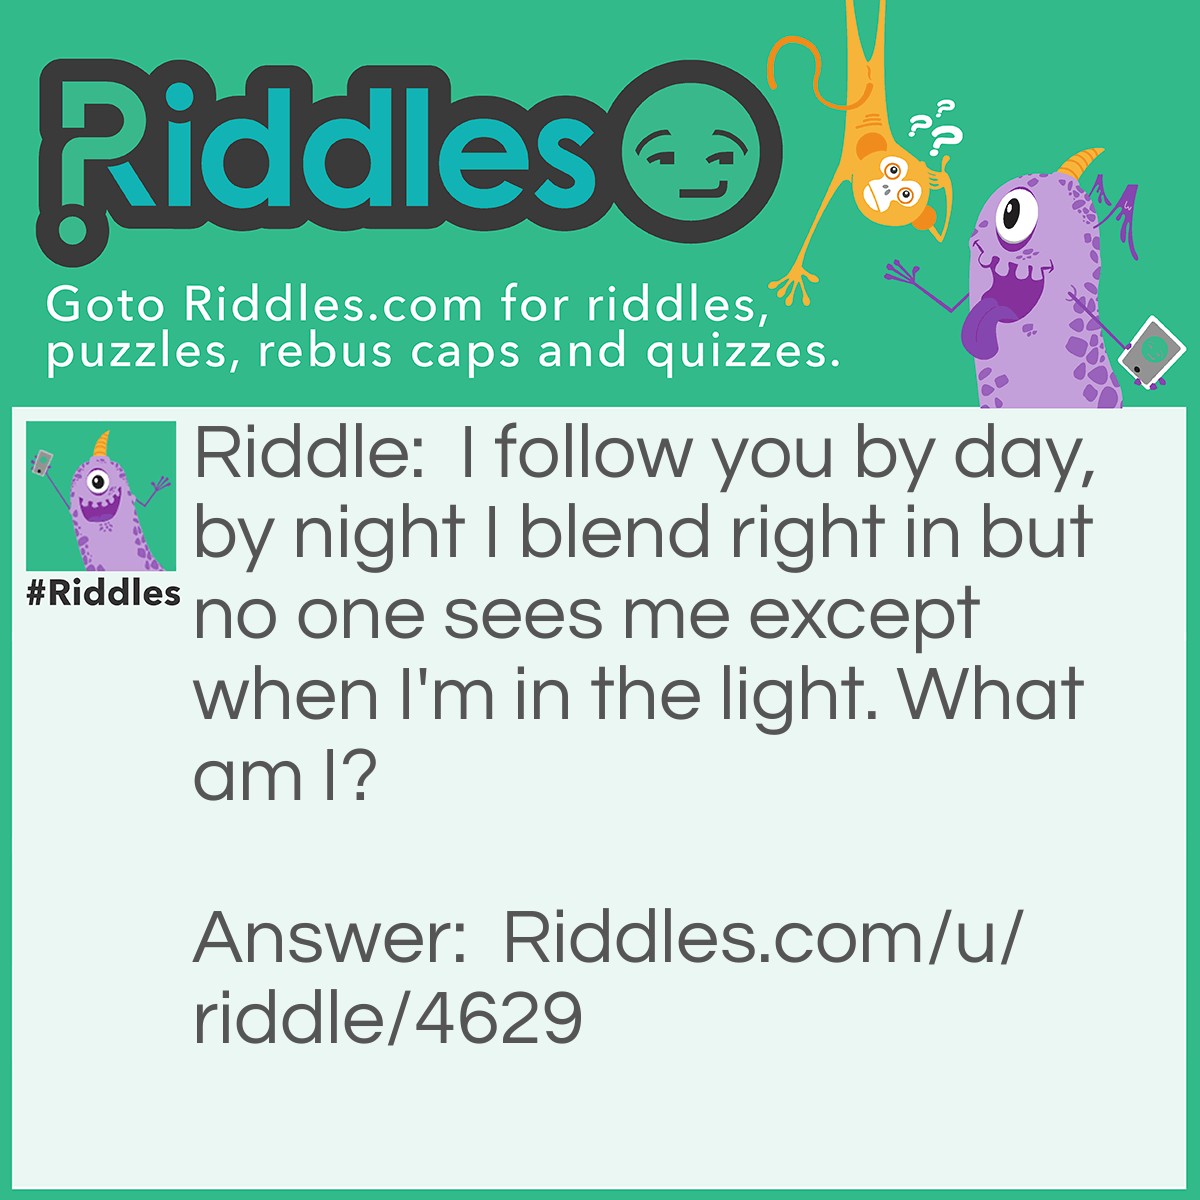 Riddle: I follow you by day, by night I blend right in but no one sees me except when I'm in the light. What am I? Answer: A shadow.